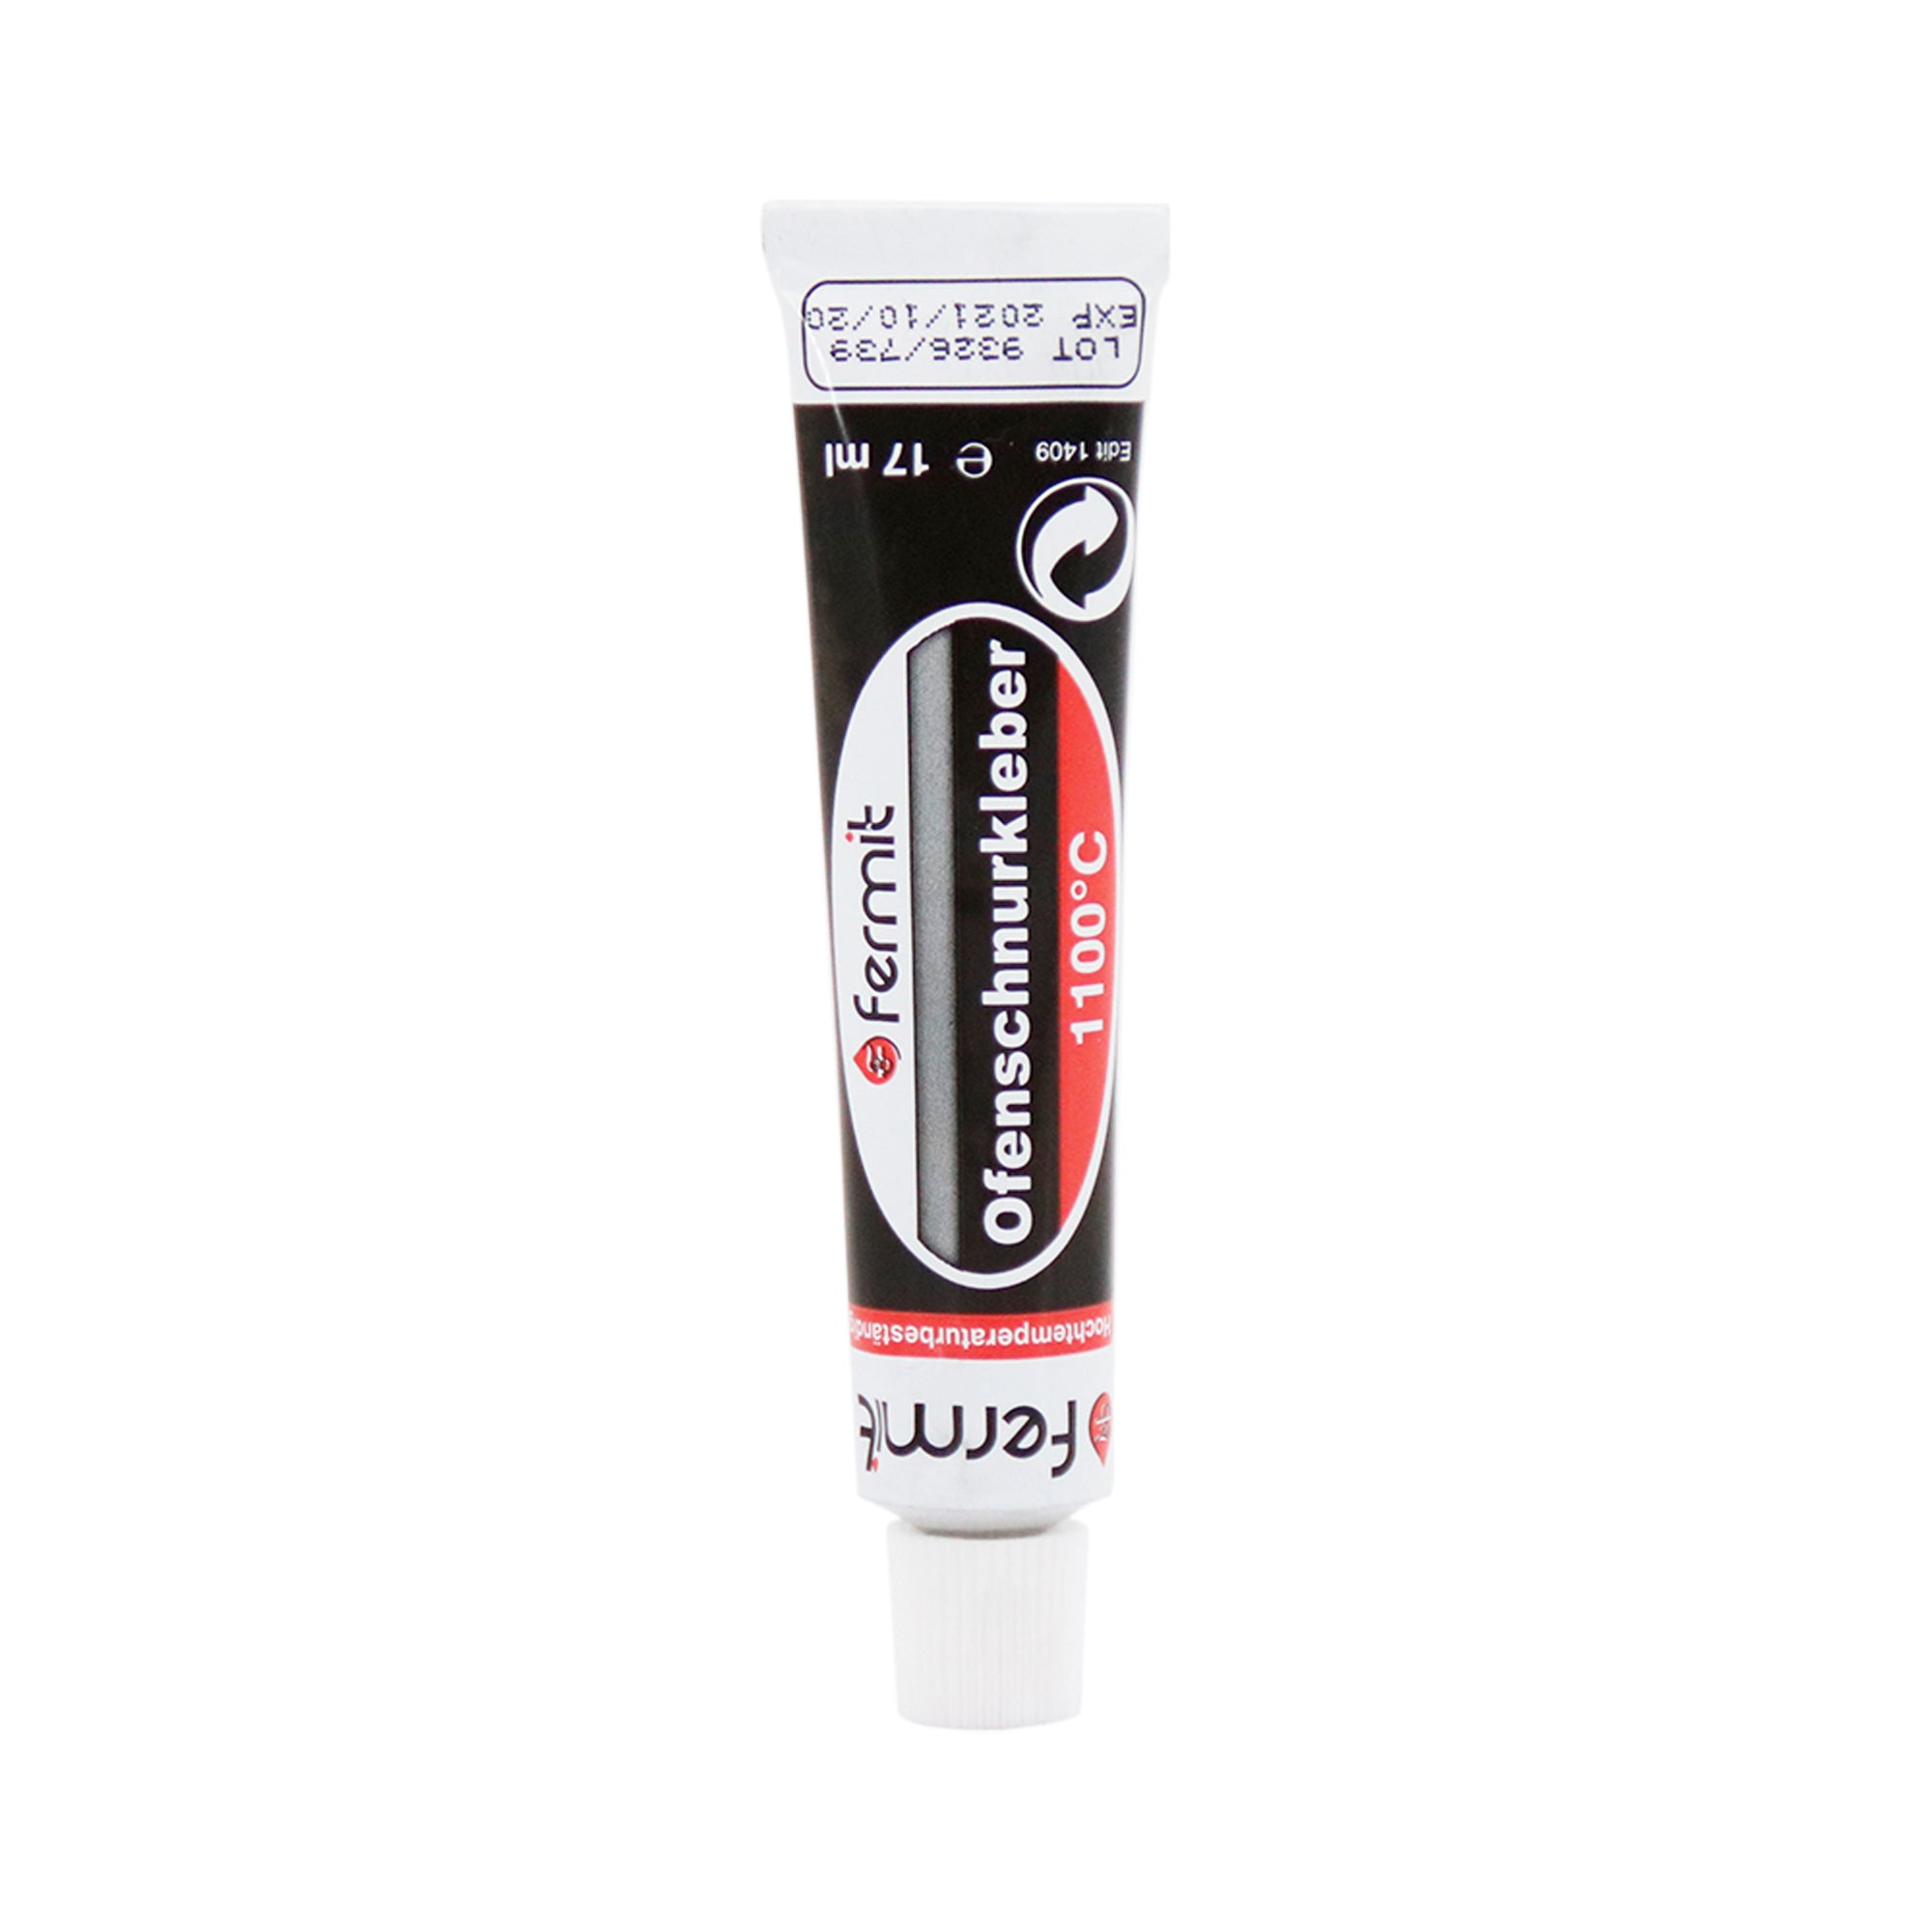 Sealing cord- oven cord adhesive heat resistant up to 1100°C